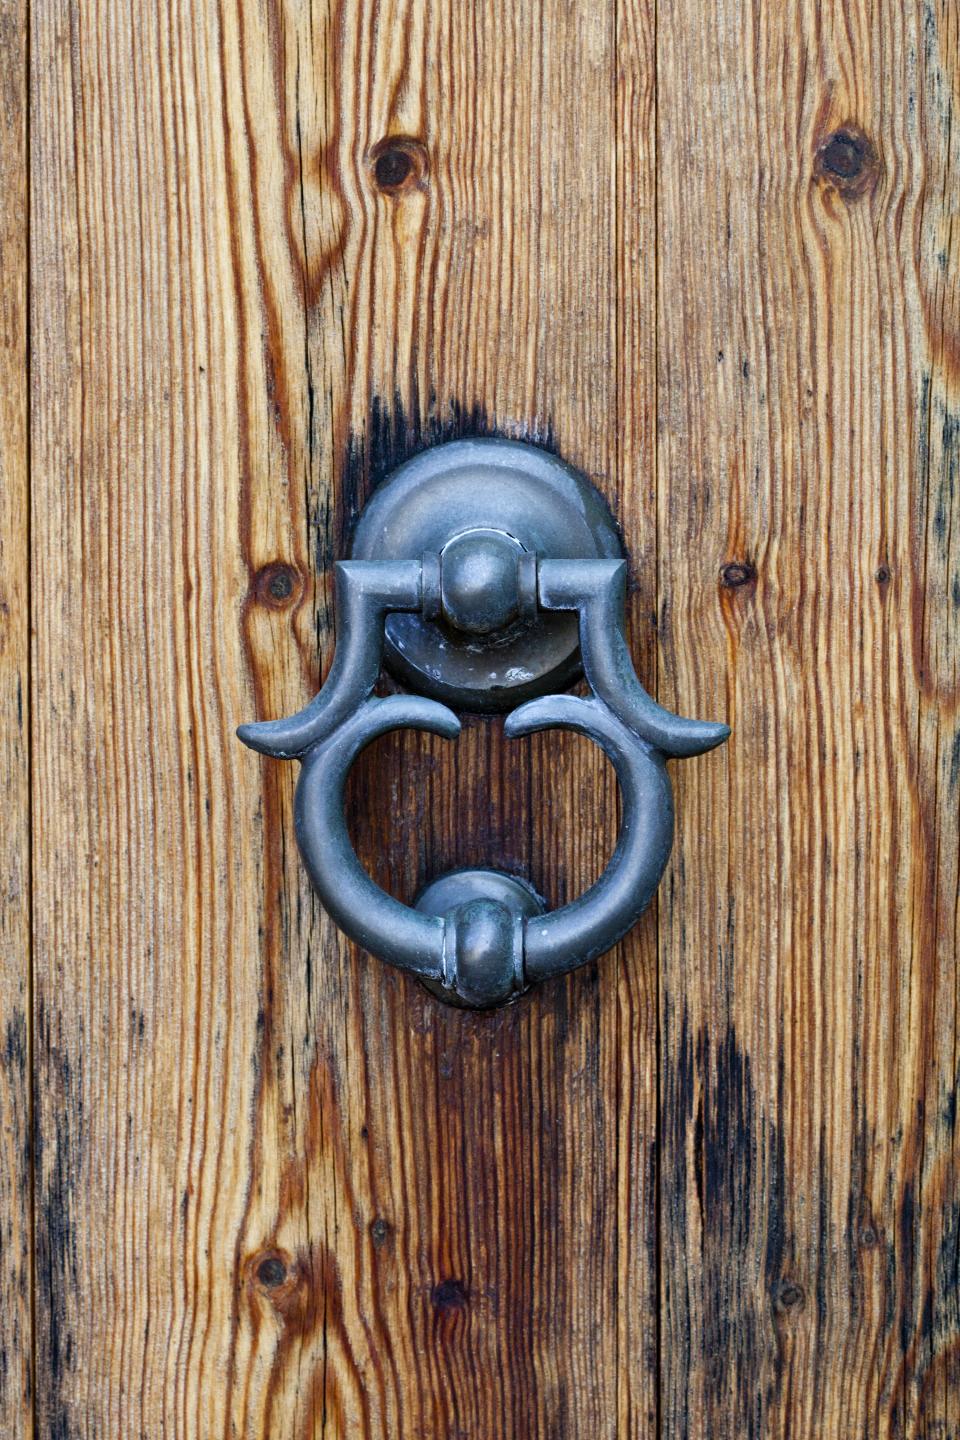 A Home Owner's Guide to the Different Types of Door Knockers – Old West Iron